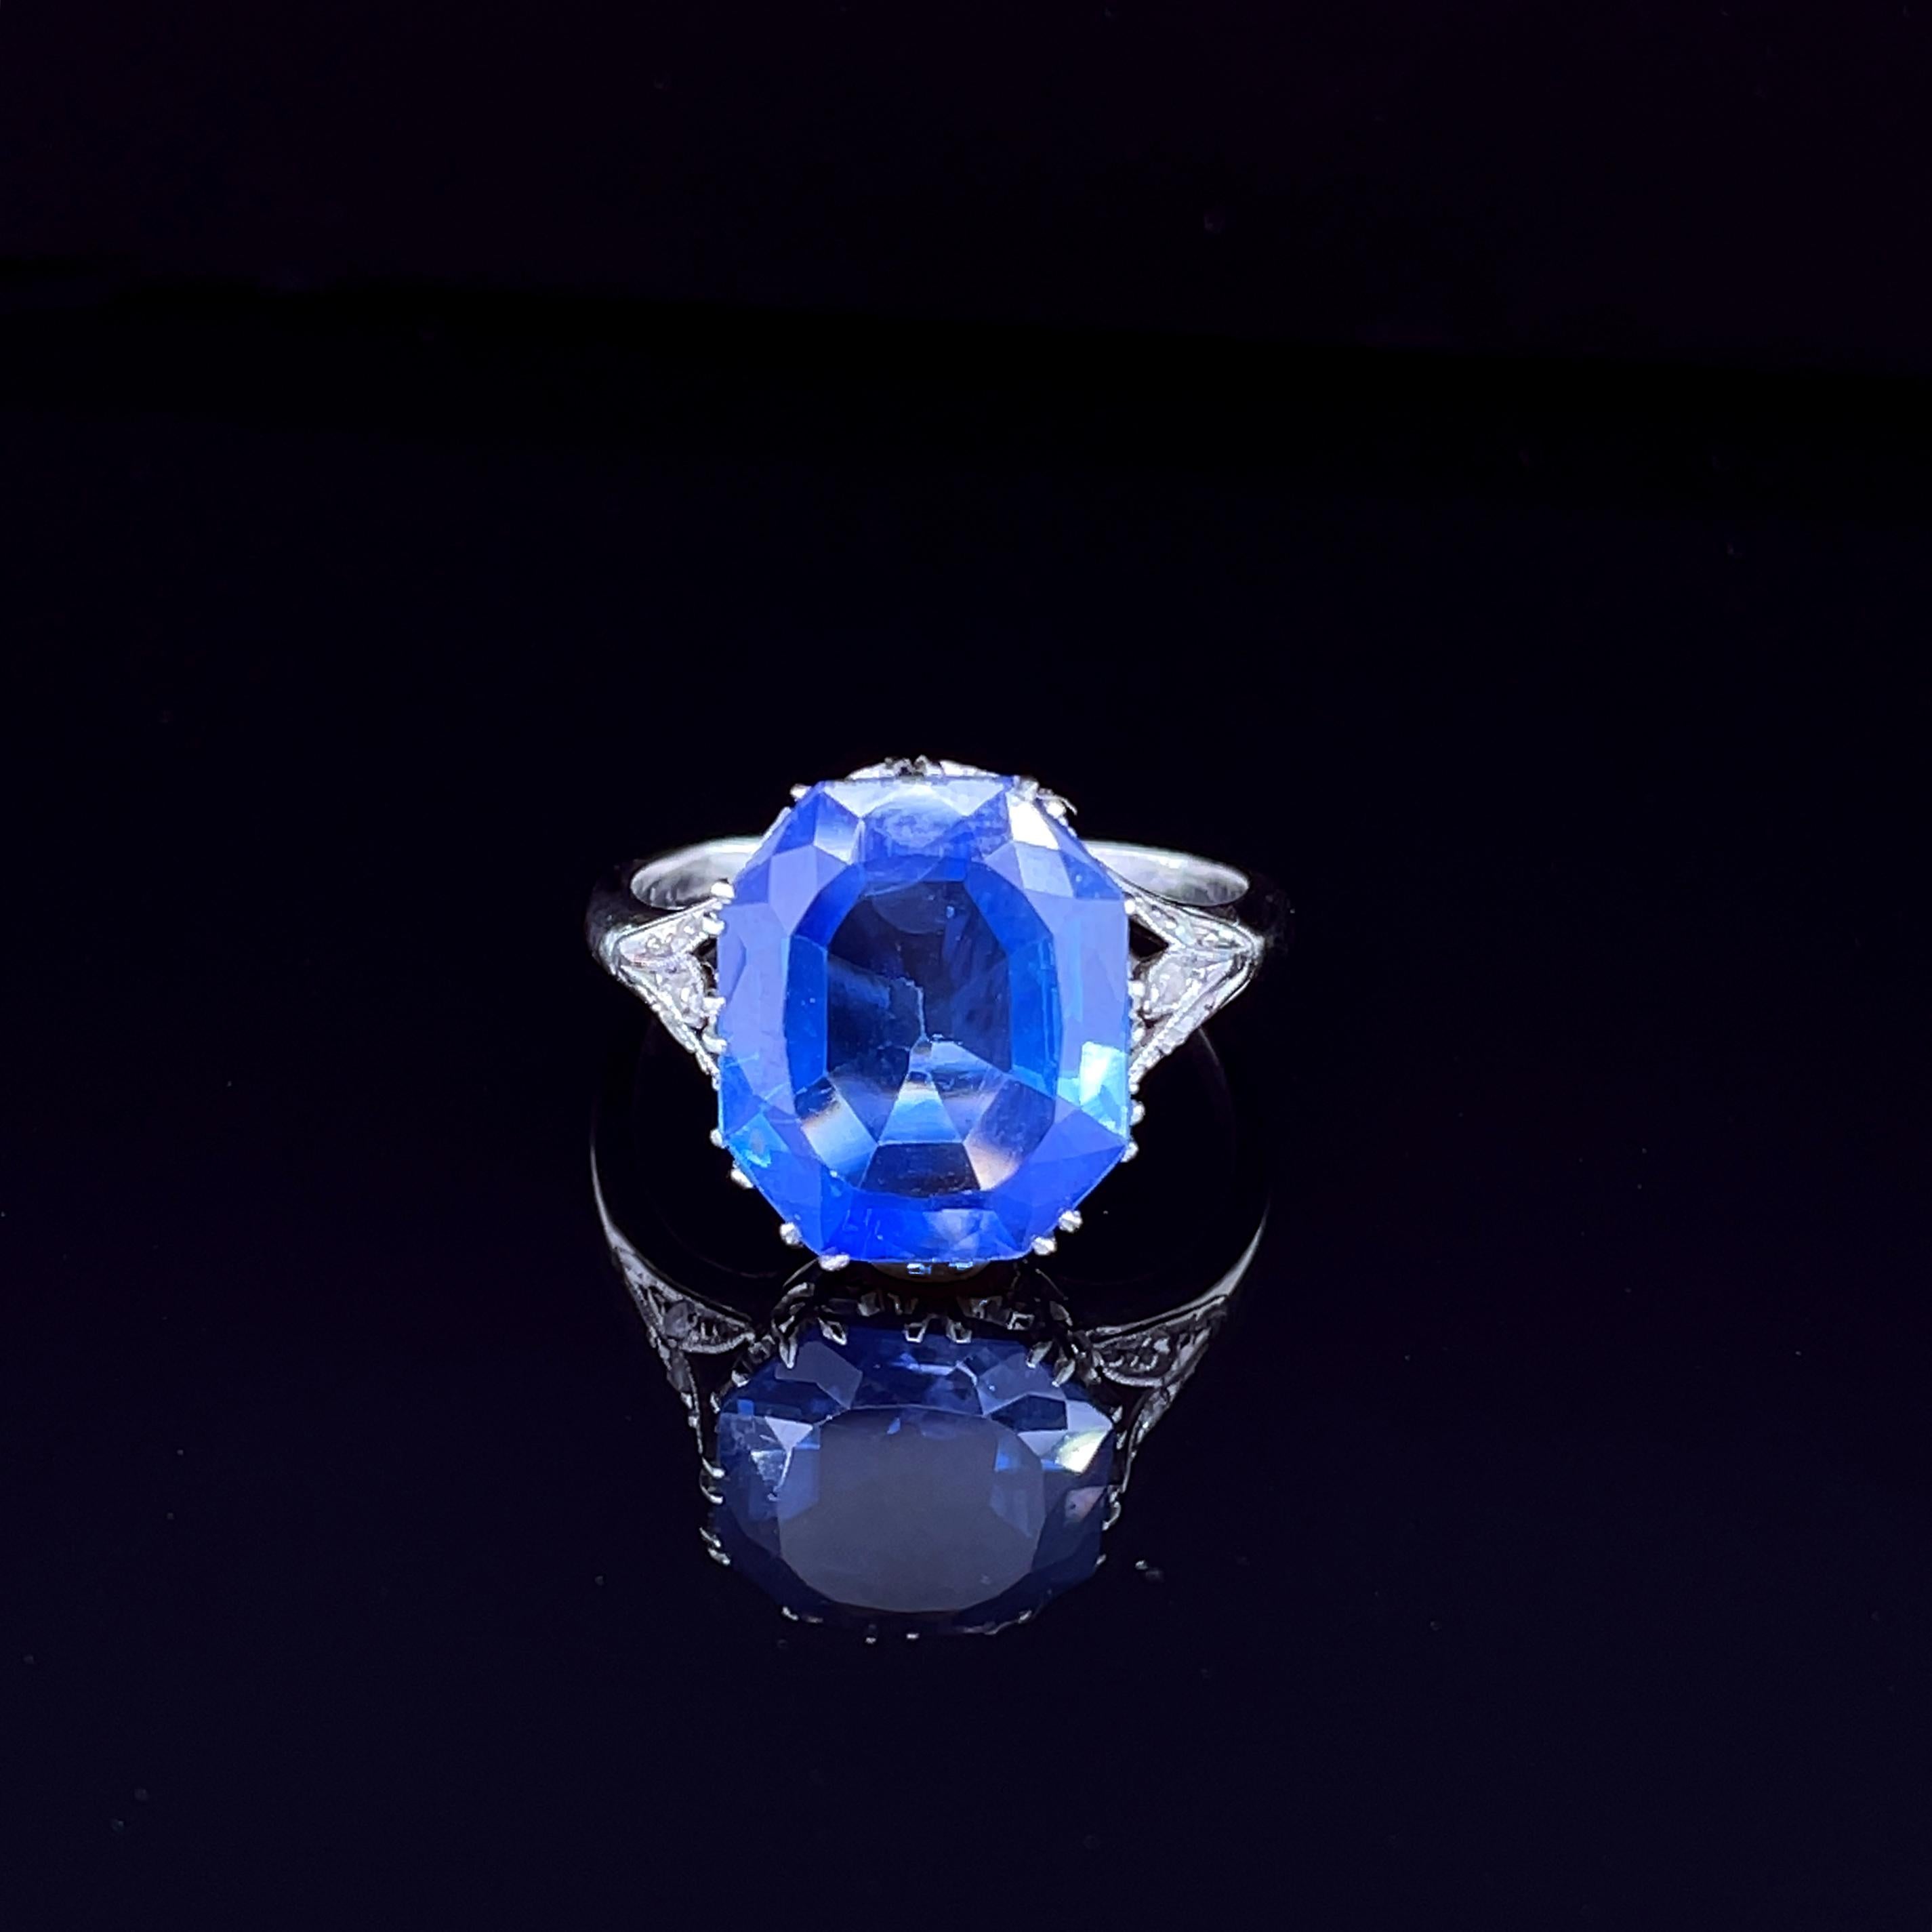 Belle Epoch Octagon Sapphire and Diamond Ring, ca. 1910s

A very stunning ring centring an octagonal cut natural unheated sapphire of 5.85 carats (certified), surrounded with small rose cut diamonds. The crown and prongs are artistically made in a